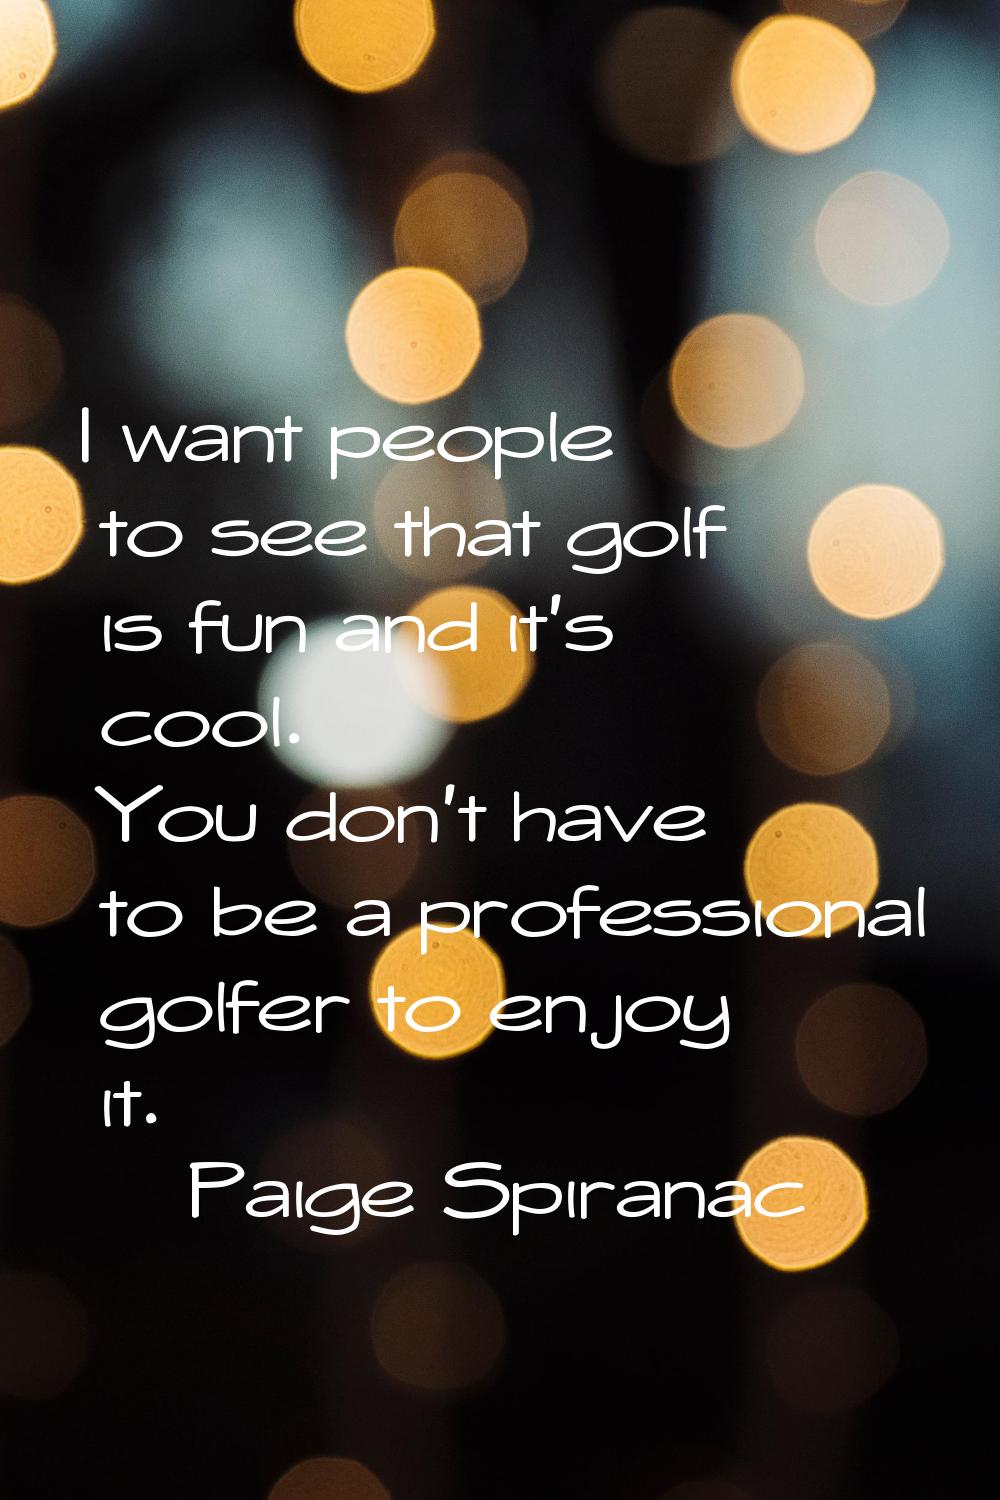 I want people to see that golf is fun and it's cool. You don't have to be a professional golfer to 